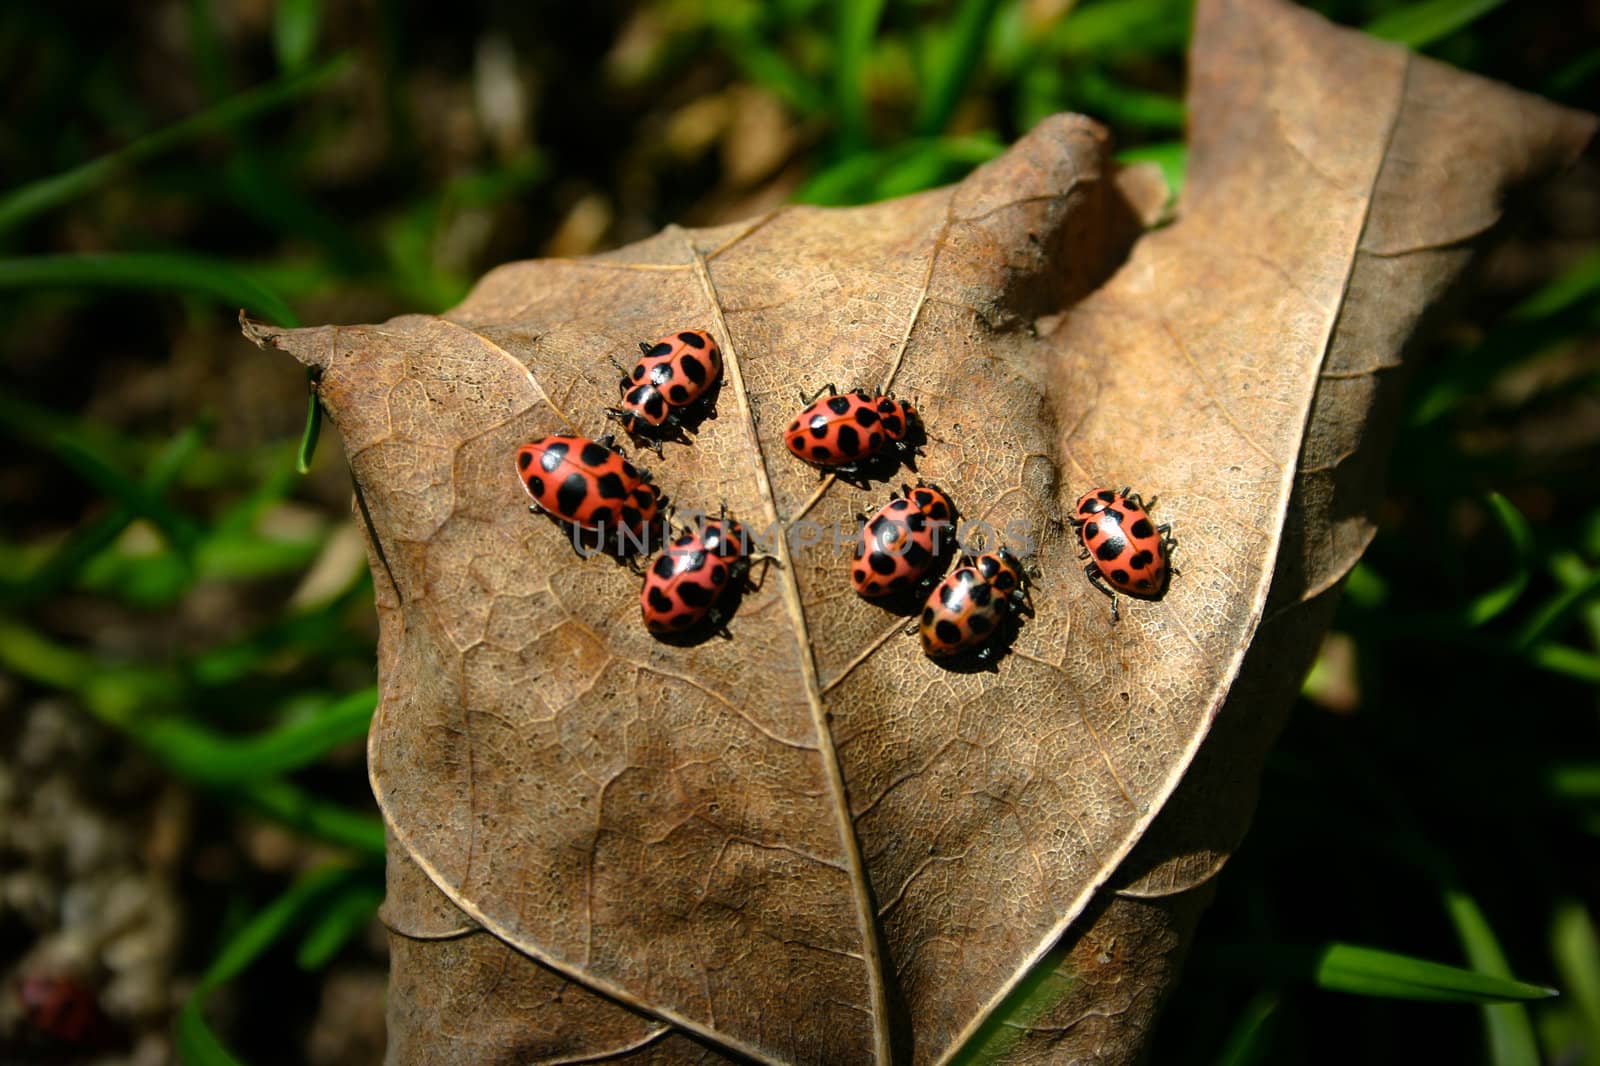 Ladybugs on a leaf by micahbowerbank